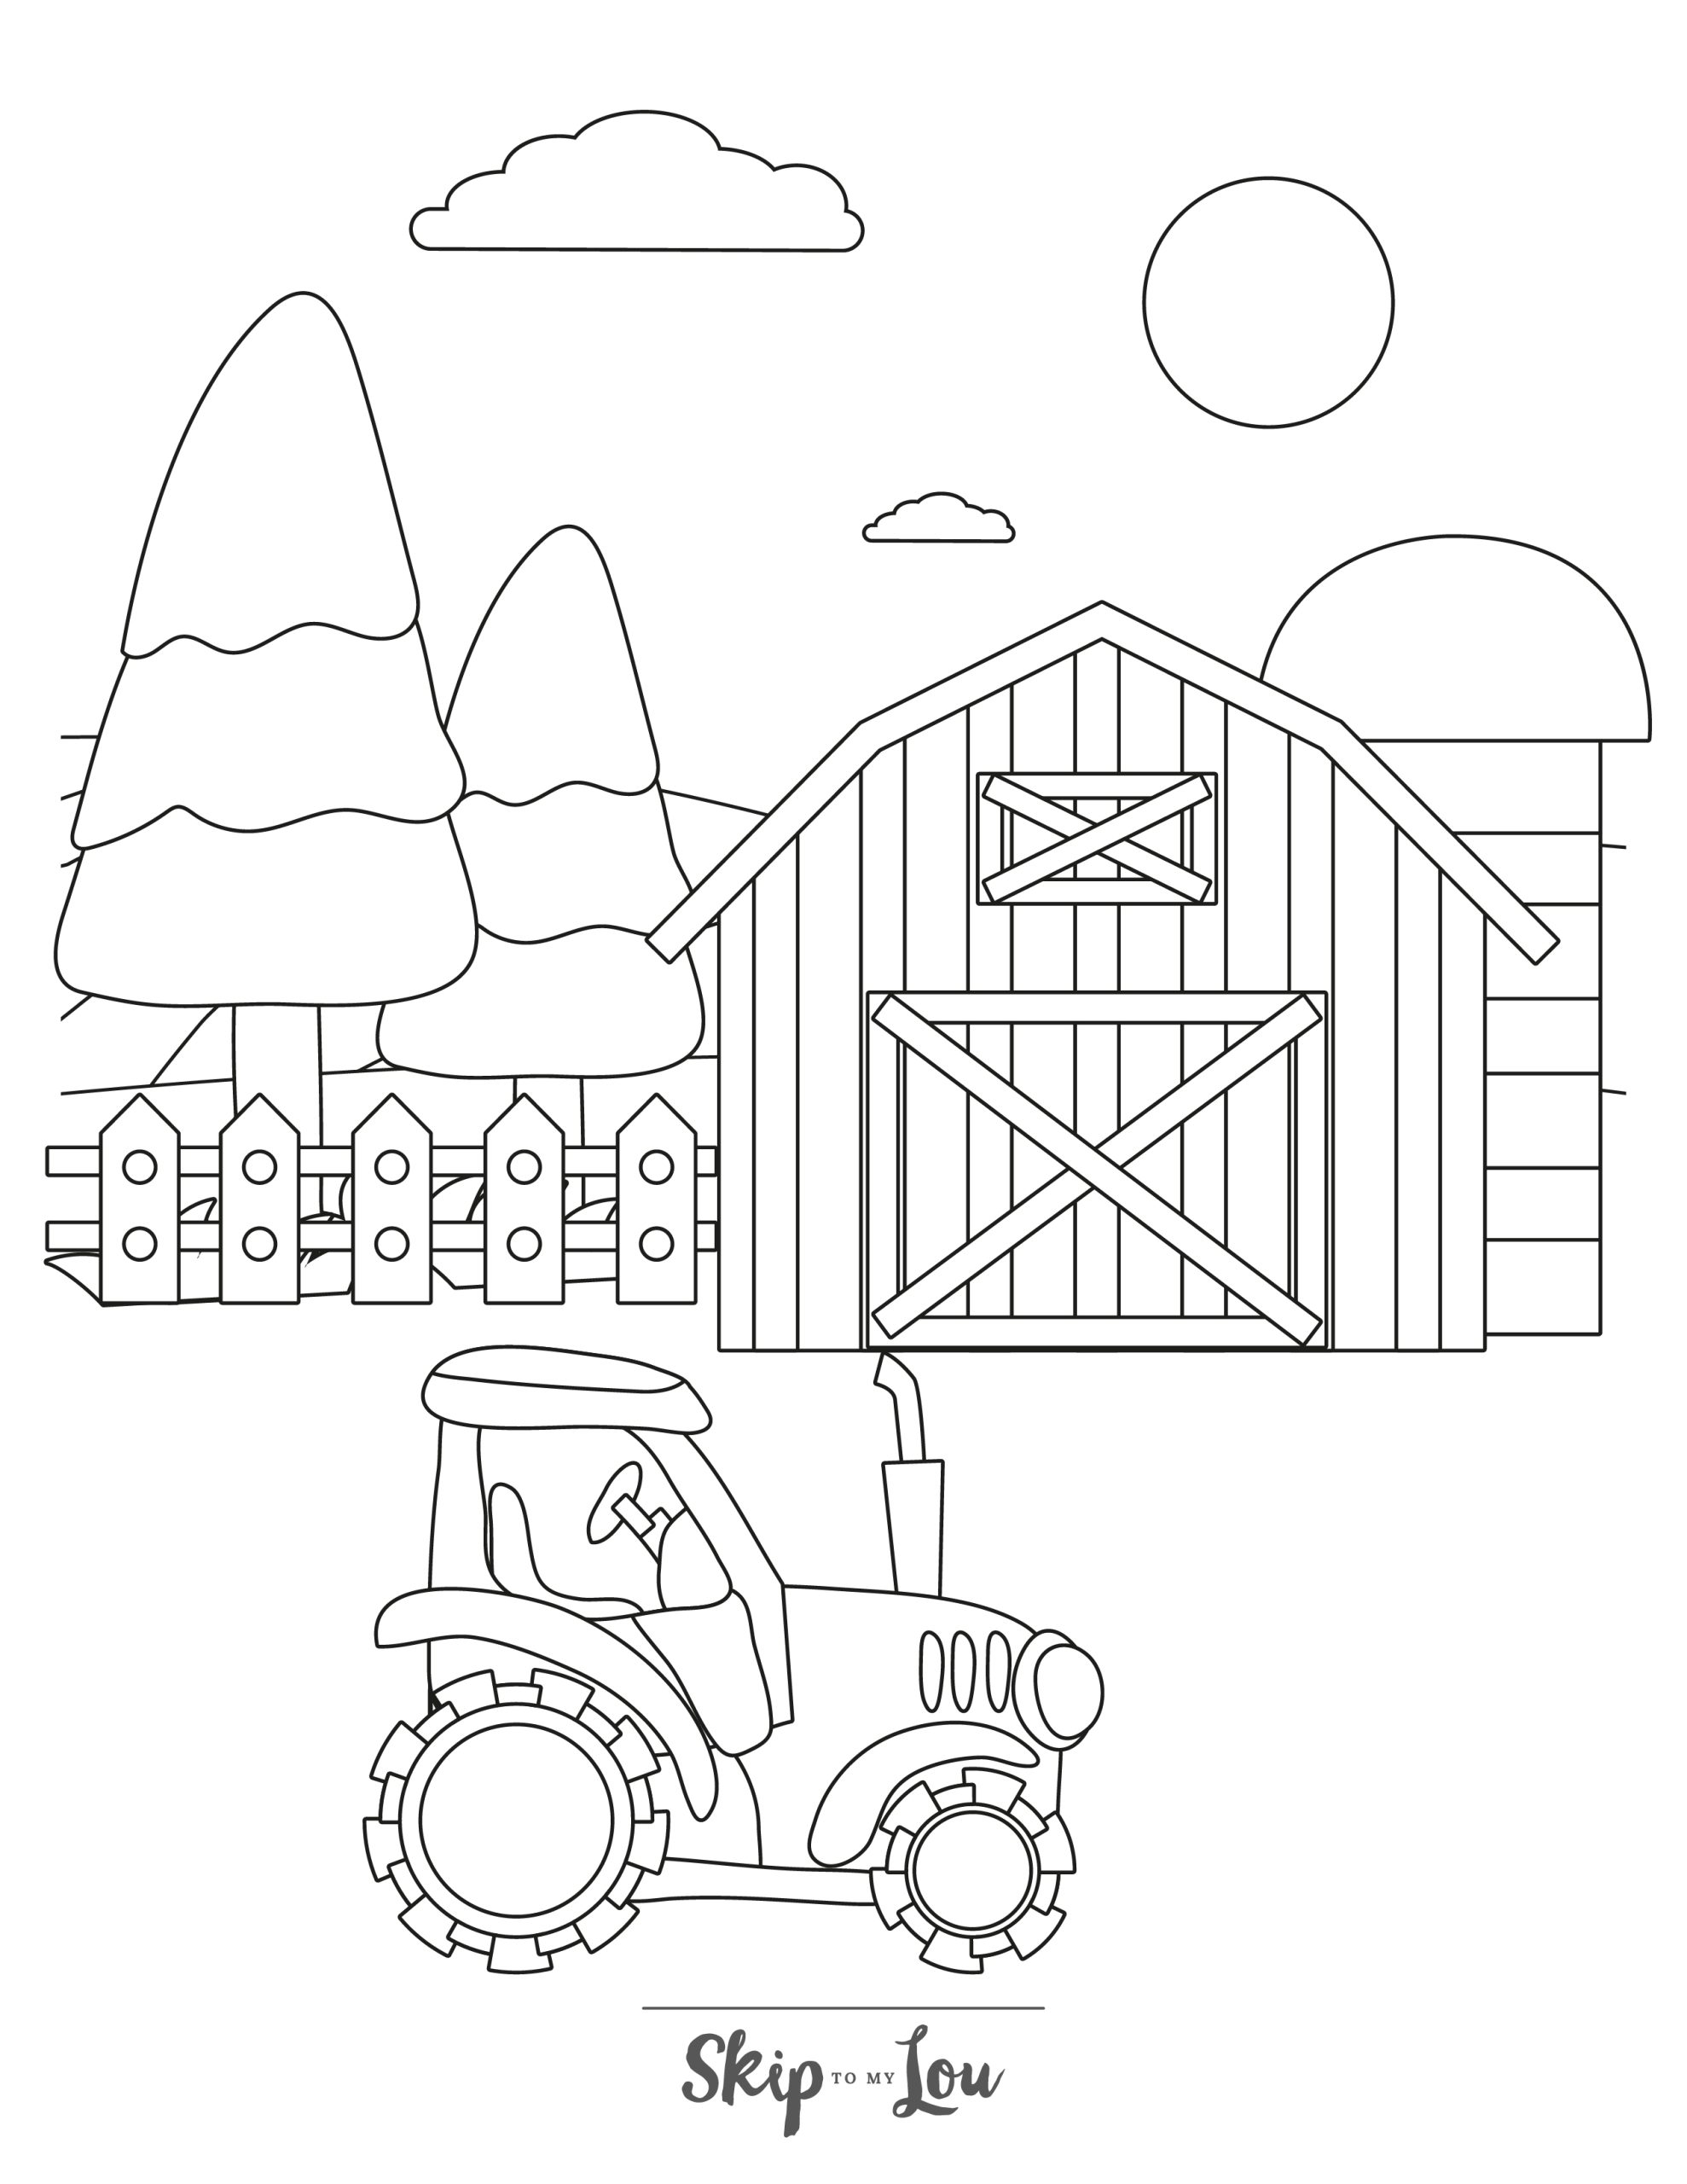 Farm Coloring Page 9 - A line drawing of a farm scene with a small tractor in the foreground. A barn with an attached silo is in the background. There are also trees and a fence. 